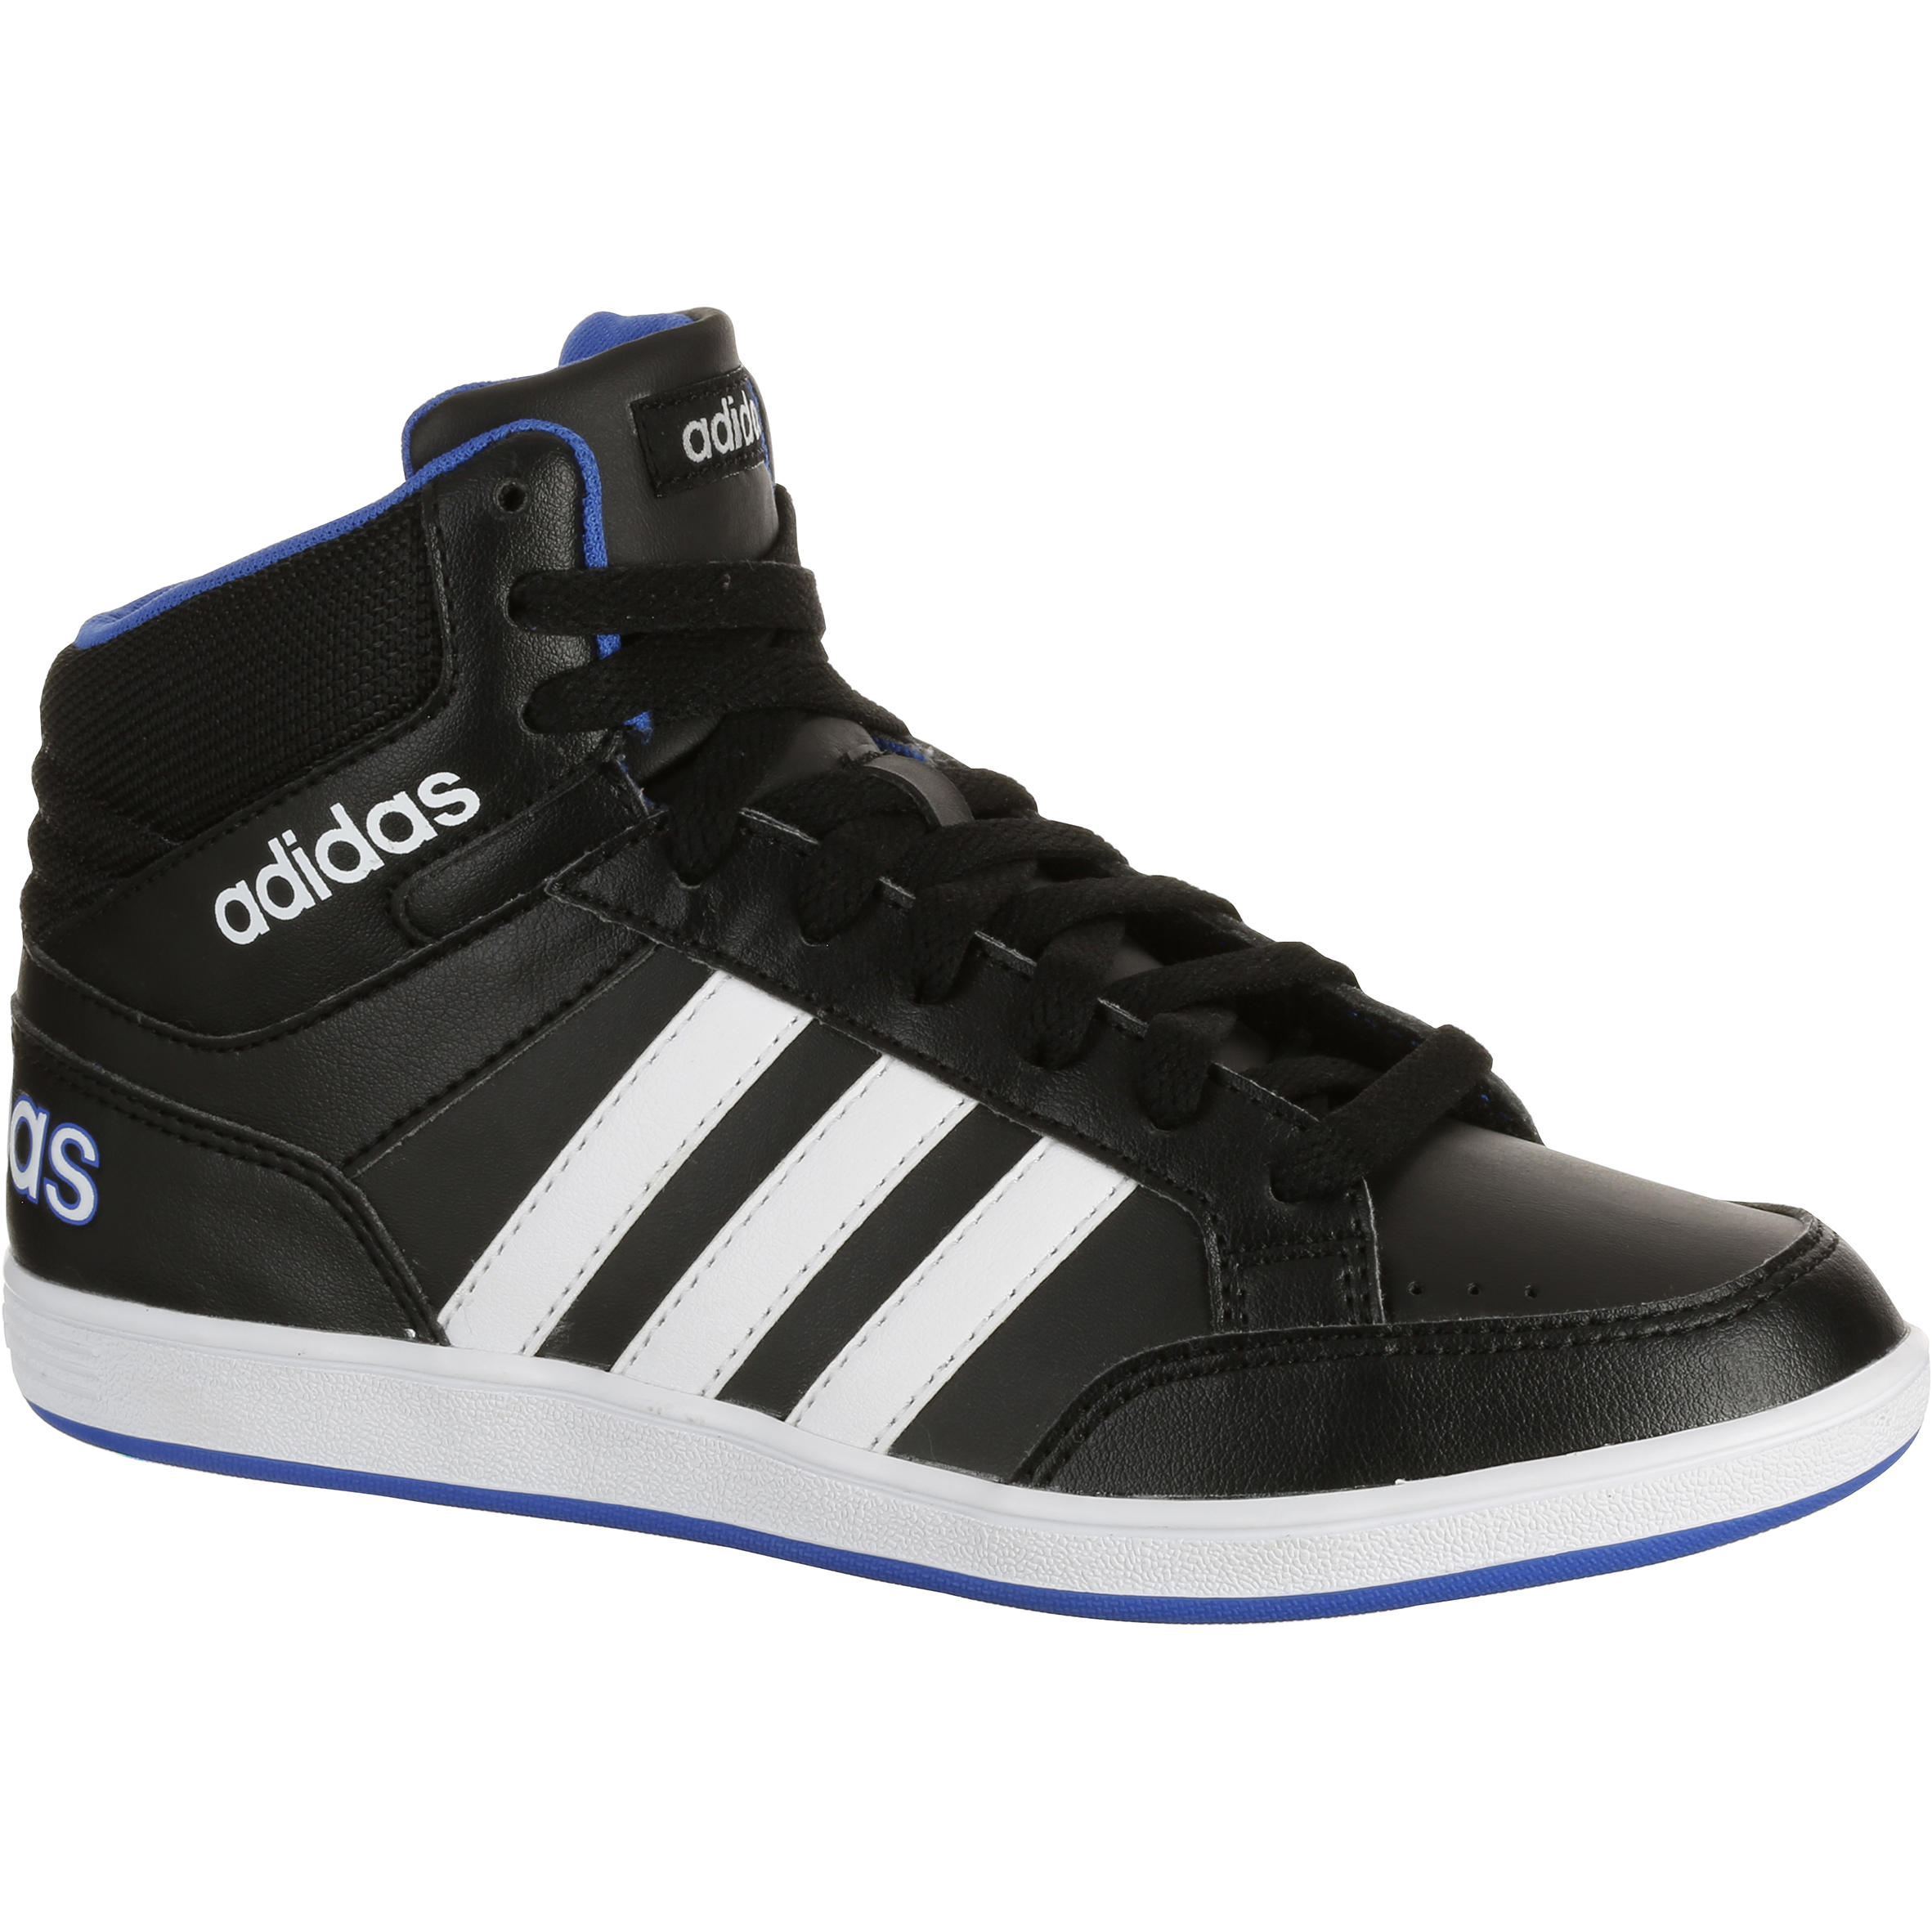 ADIDAS Hoops Children's Fitness Walking Shoes - Black/White